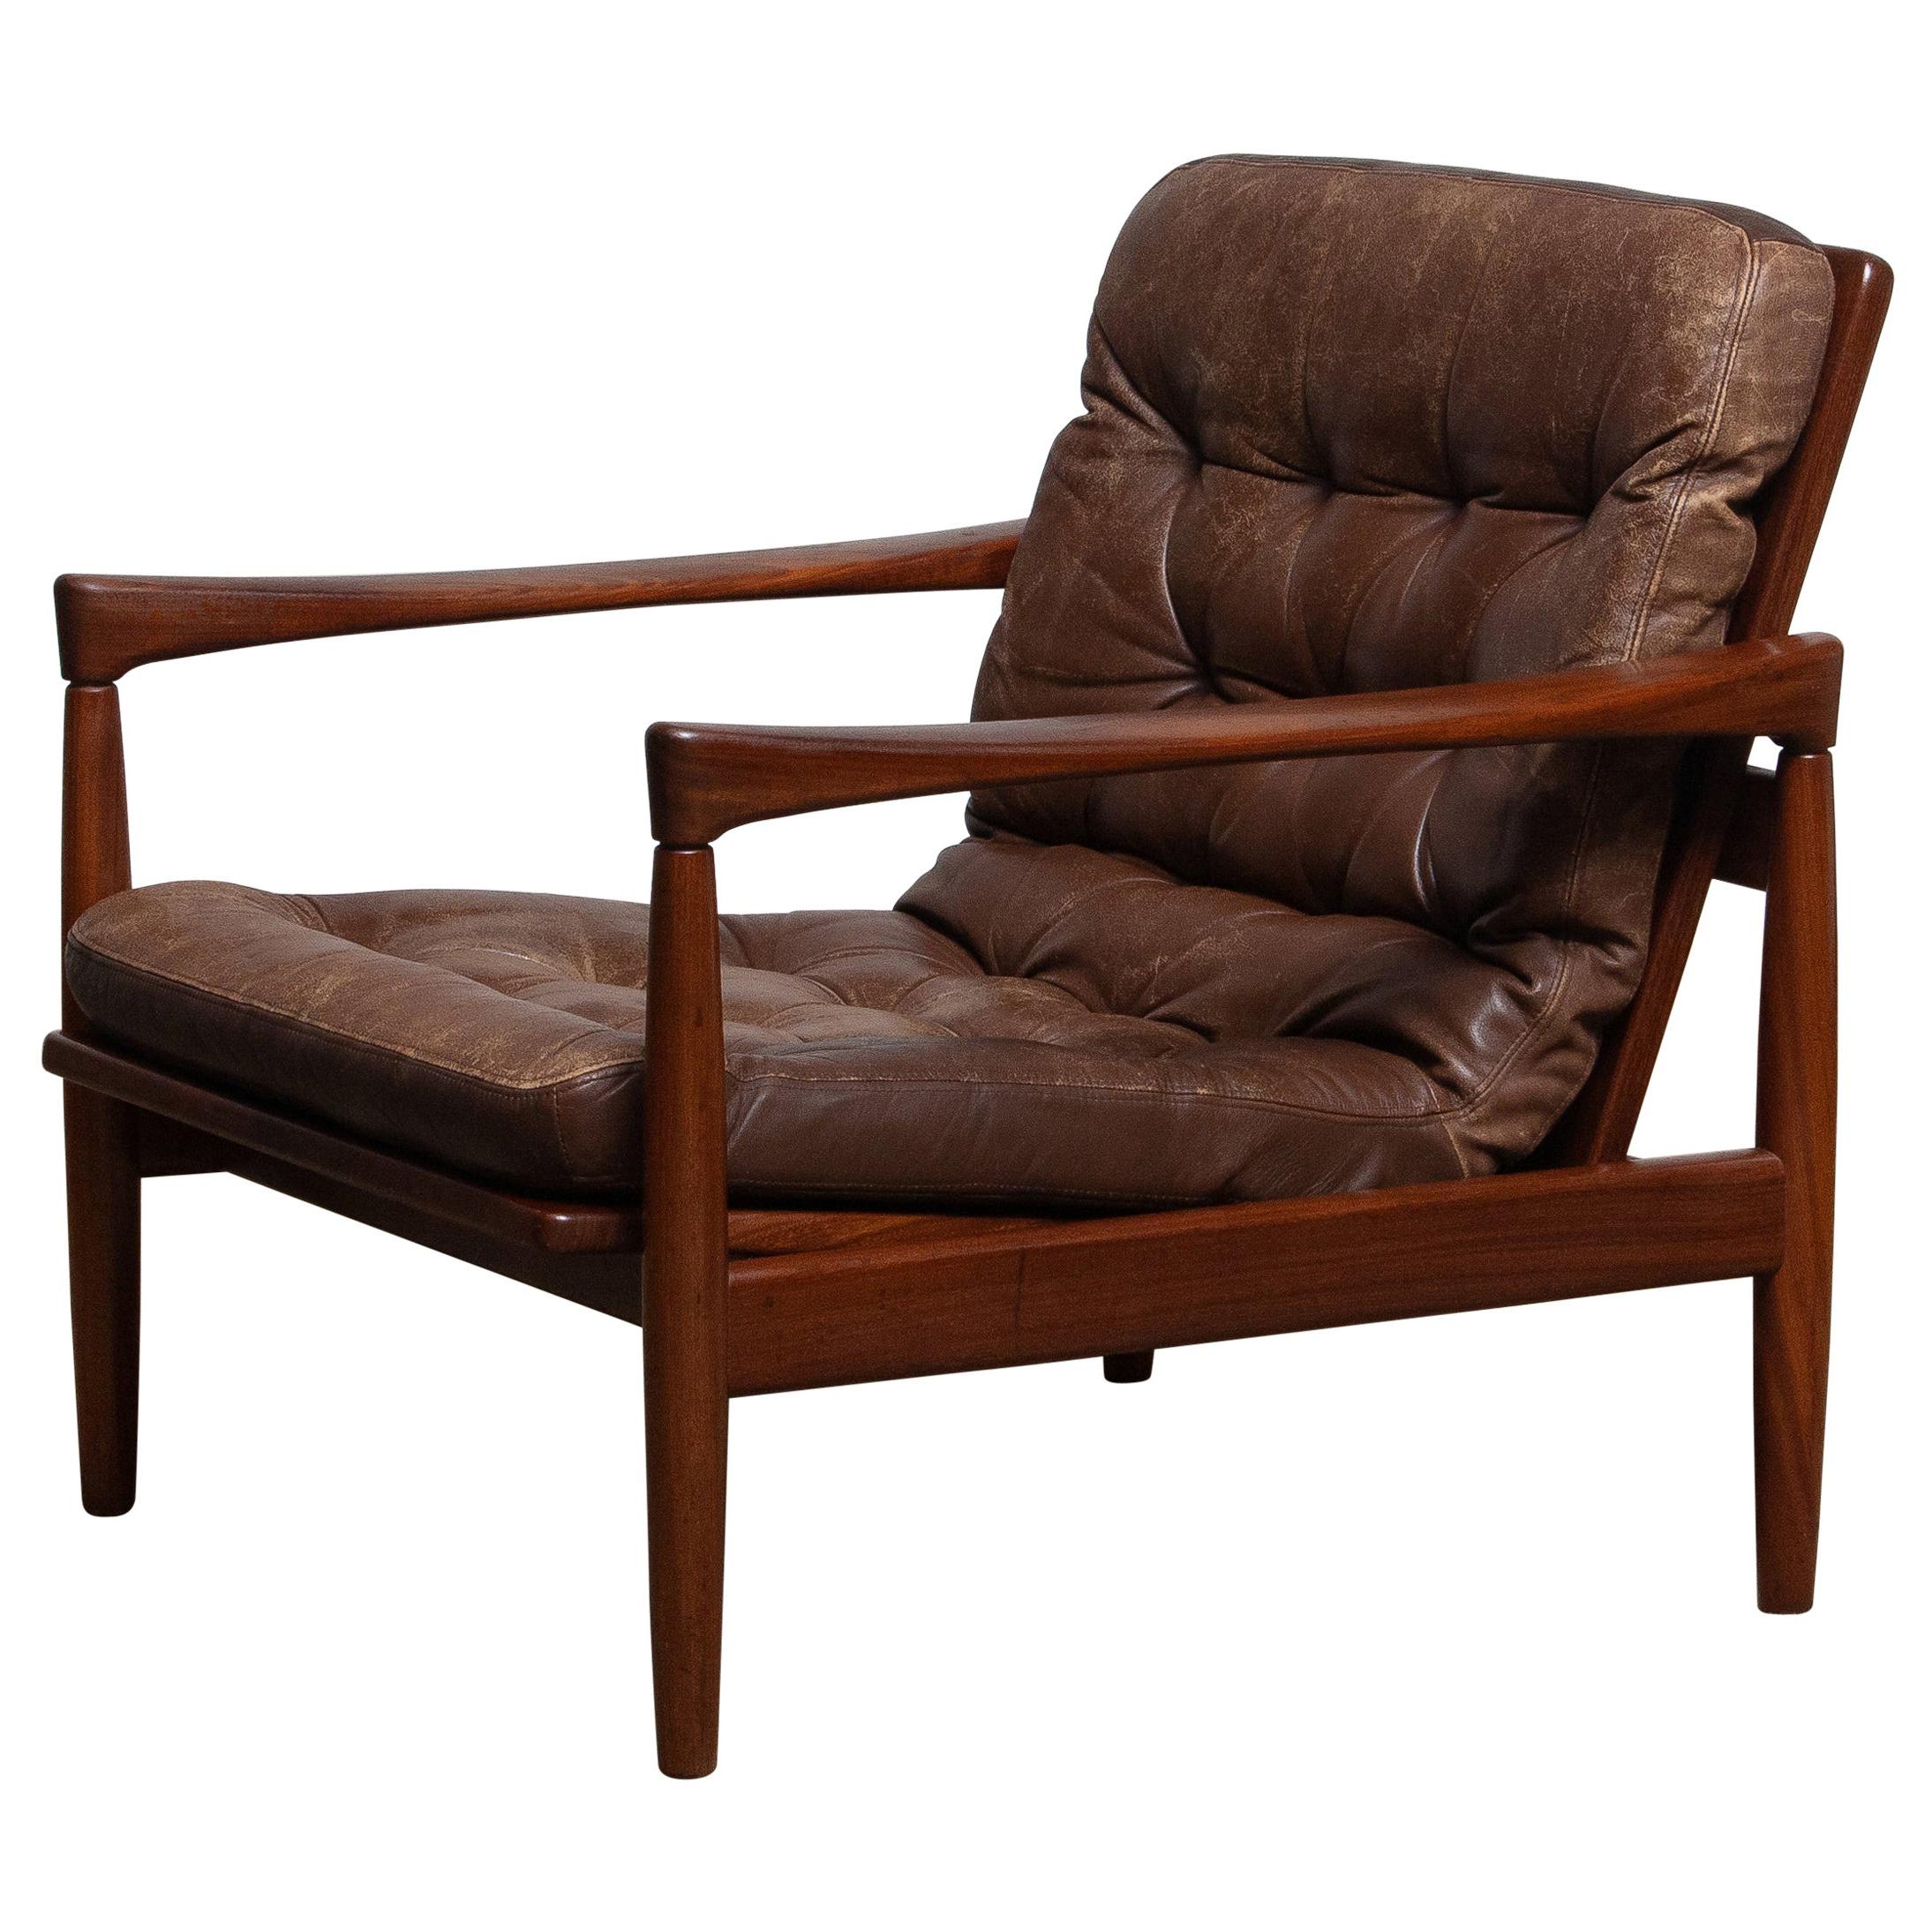 1960s, Teak and Brown Leather Lounge Chair by Erik Wörtz for Bröderna Anderssons